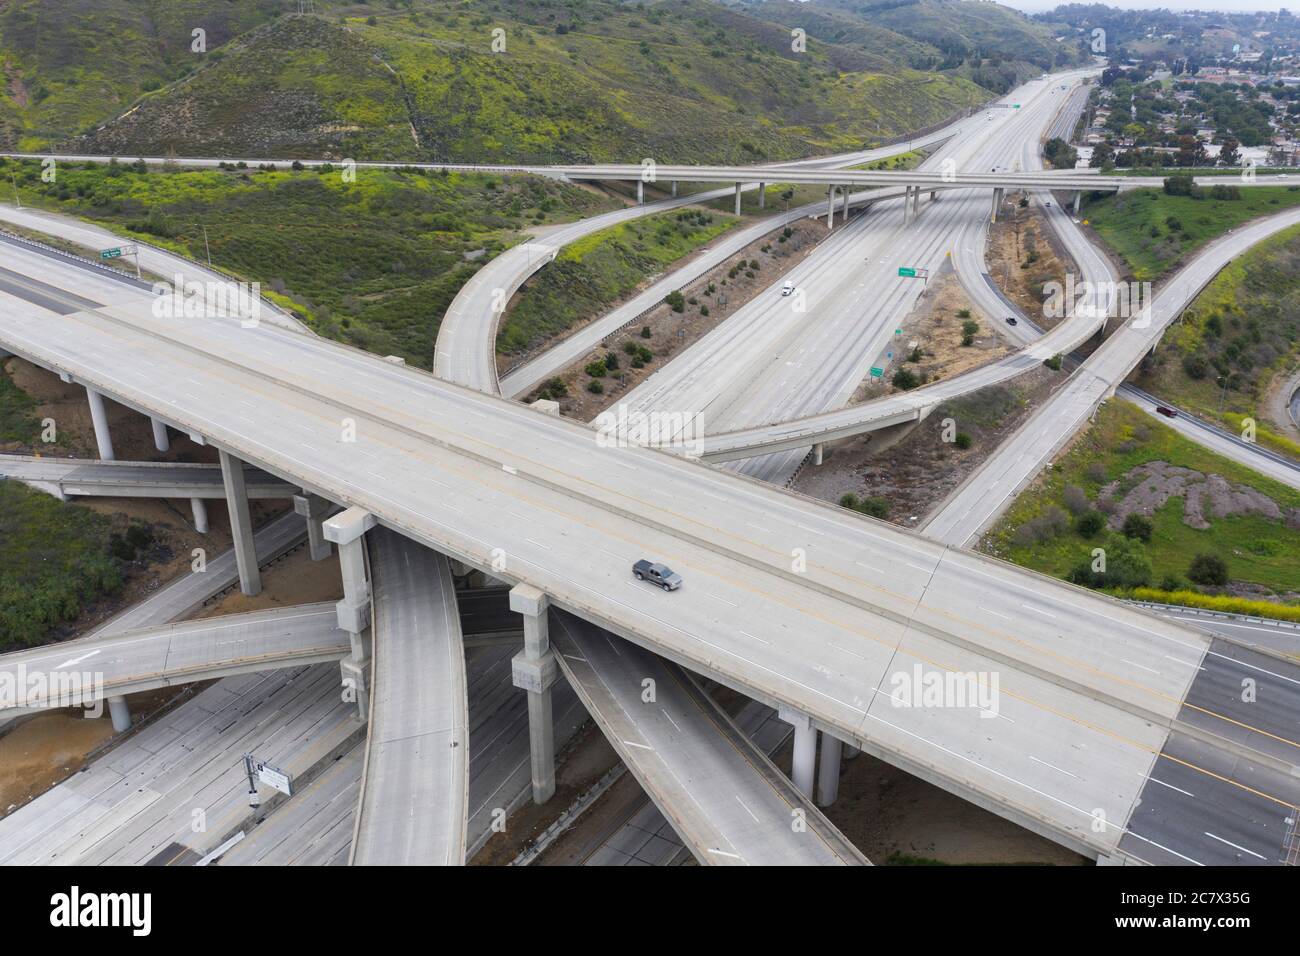 Aerial view of the empty interchange of the 57, 71 and 10 freeways in Pomona, California during the Covid-19 pandemic lockdown Stock Photo